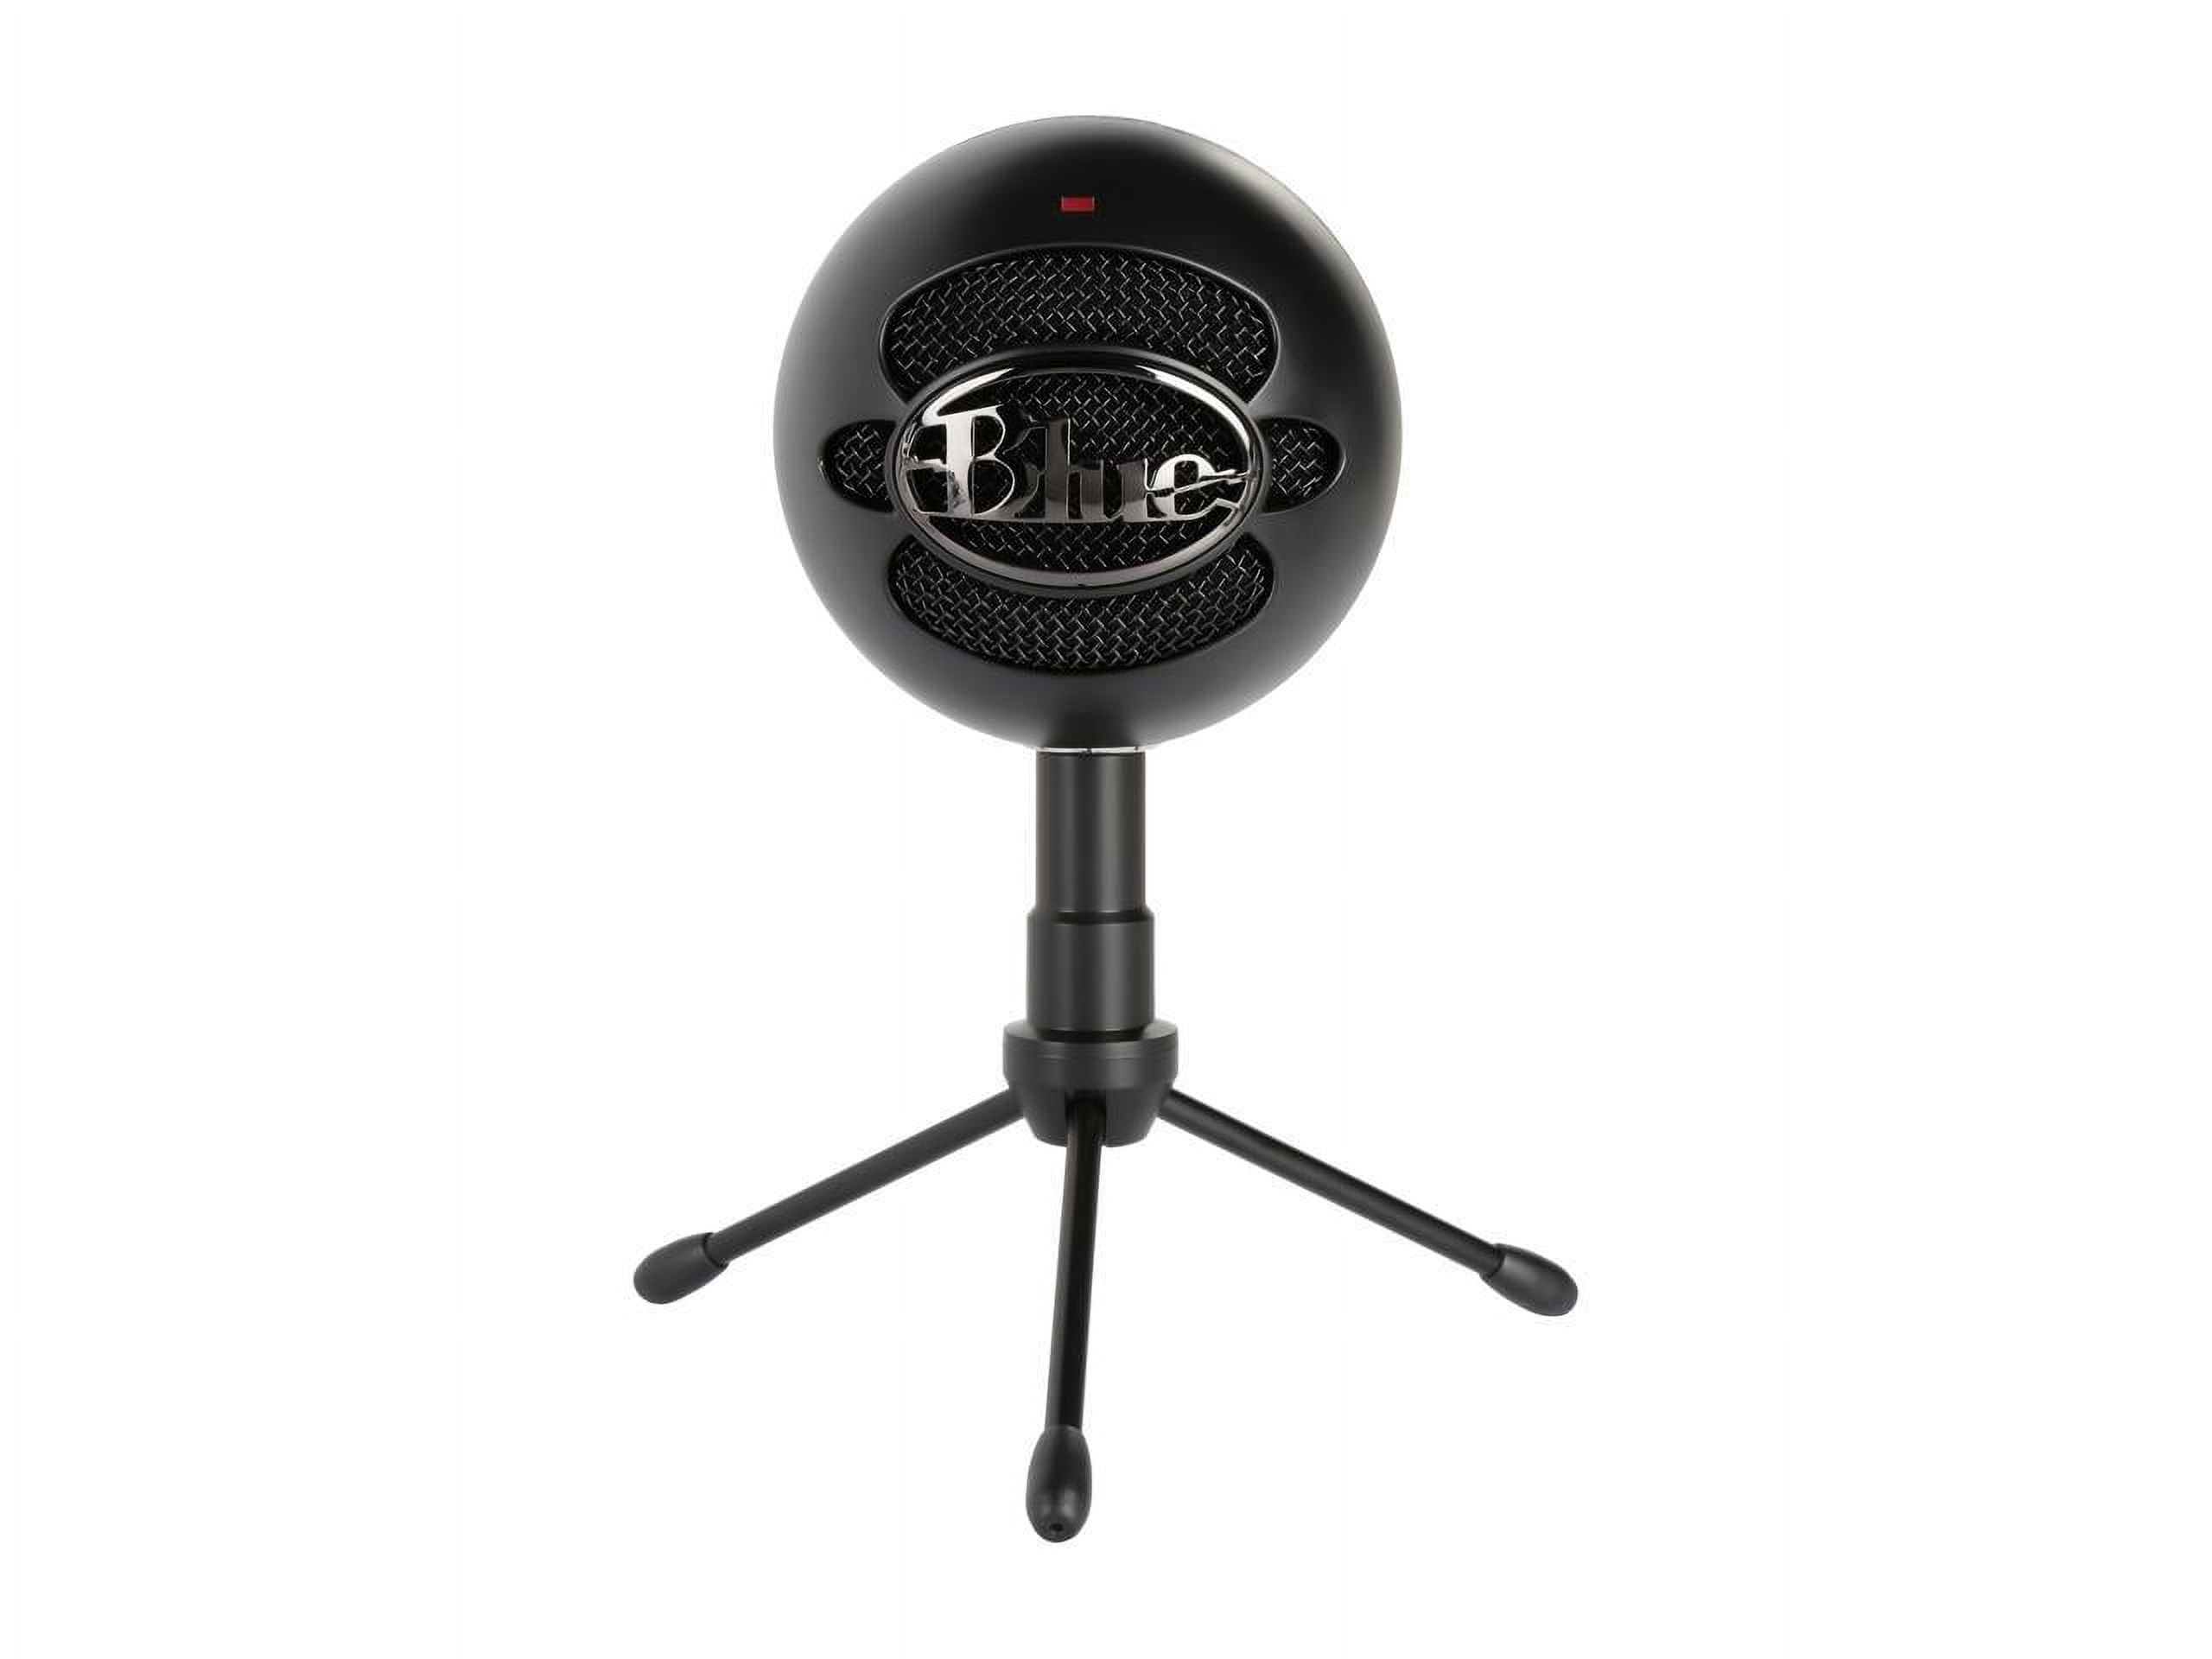 Blue Snowball iCE USB Microphone for PC, Mac, Gaming, Recording, Streaming, Podcasting, with Cardioid Condenser Mic Capsule, Adjustable Desktop Stand and USB cable, Plug 'n Play – Black - image 2 of 6